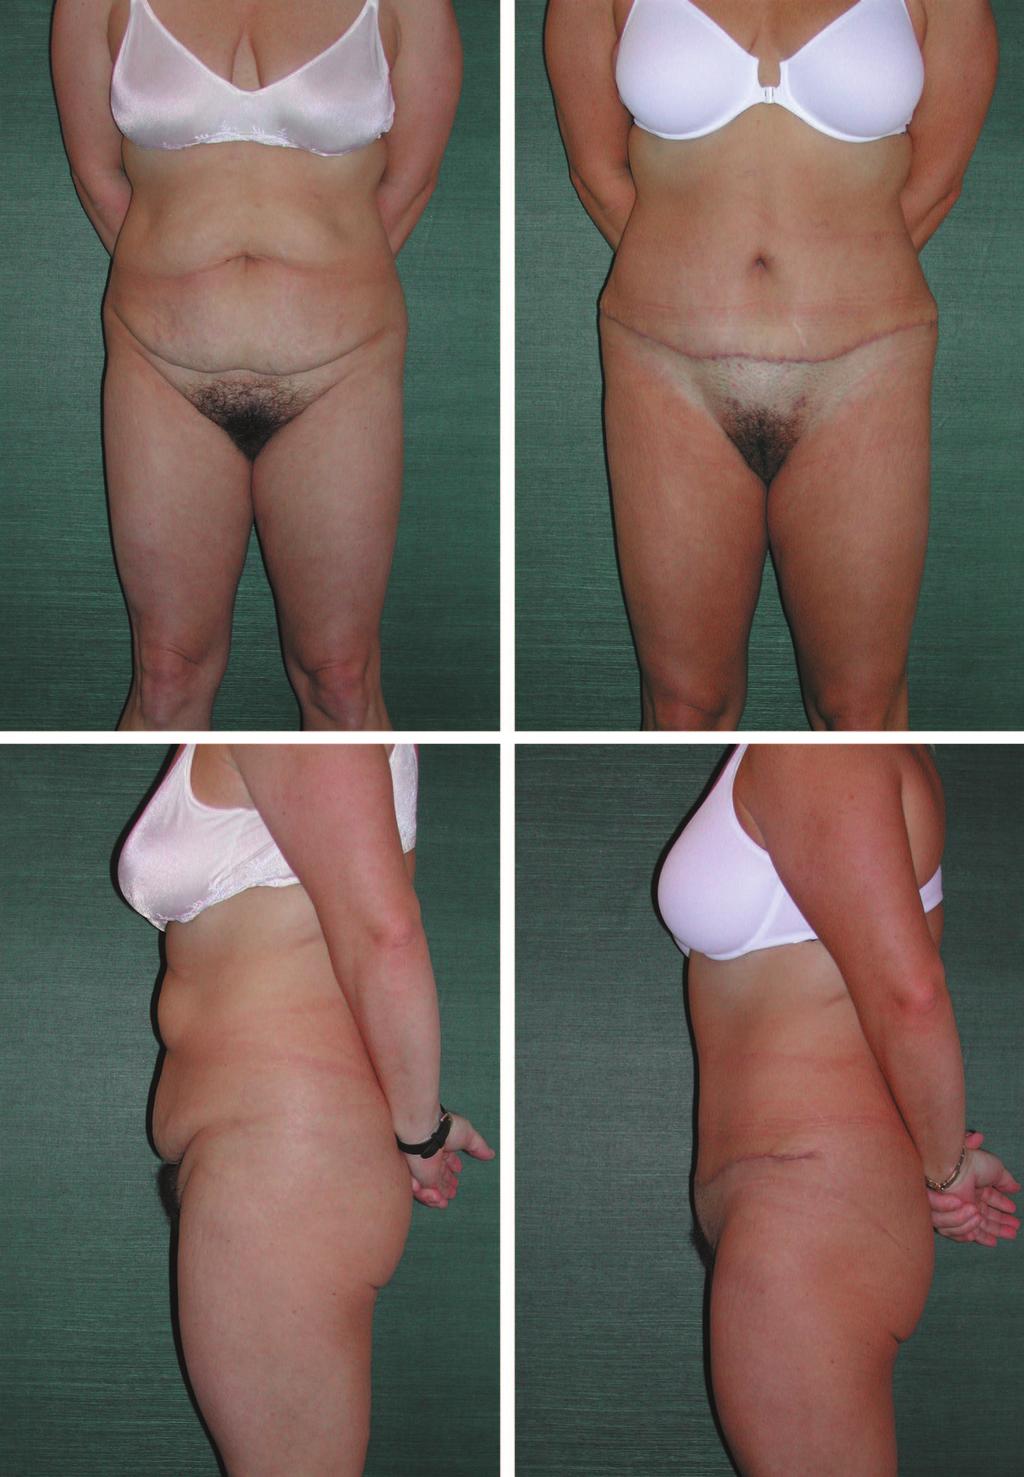 Plastic and Reconstructive Surgery April 2008 Fig. 2. A 36-year-old woman, 5 feet 2 inches tall, after a 78-pound weight loss, with good skin tone and laxity confined mainly to the lower abdomen.